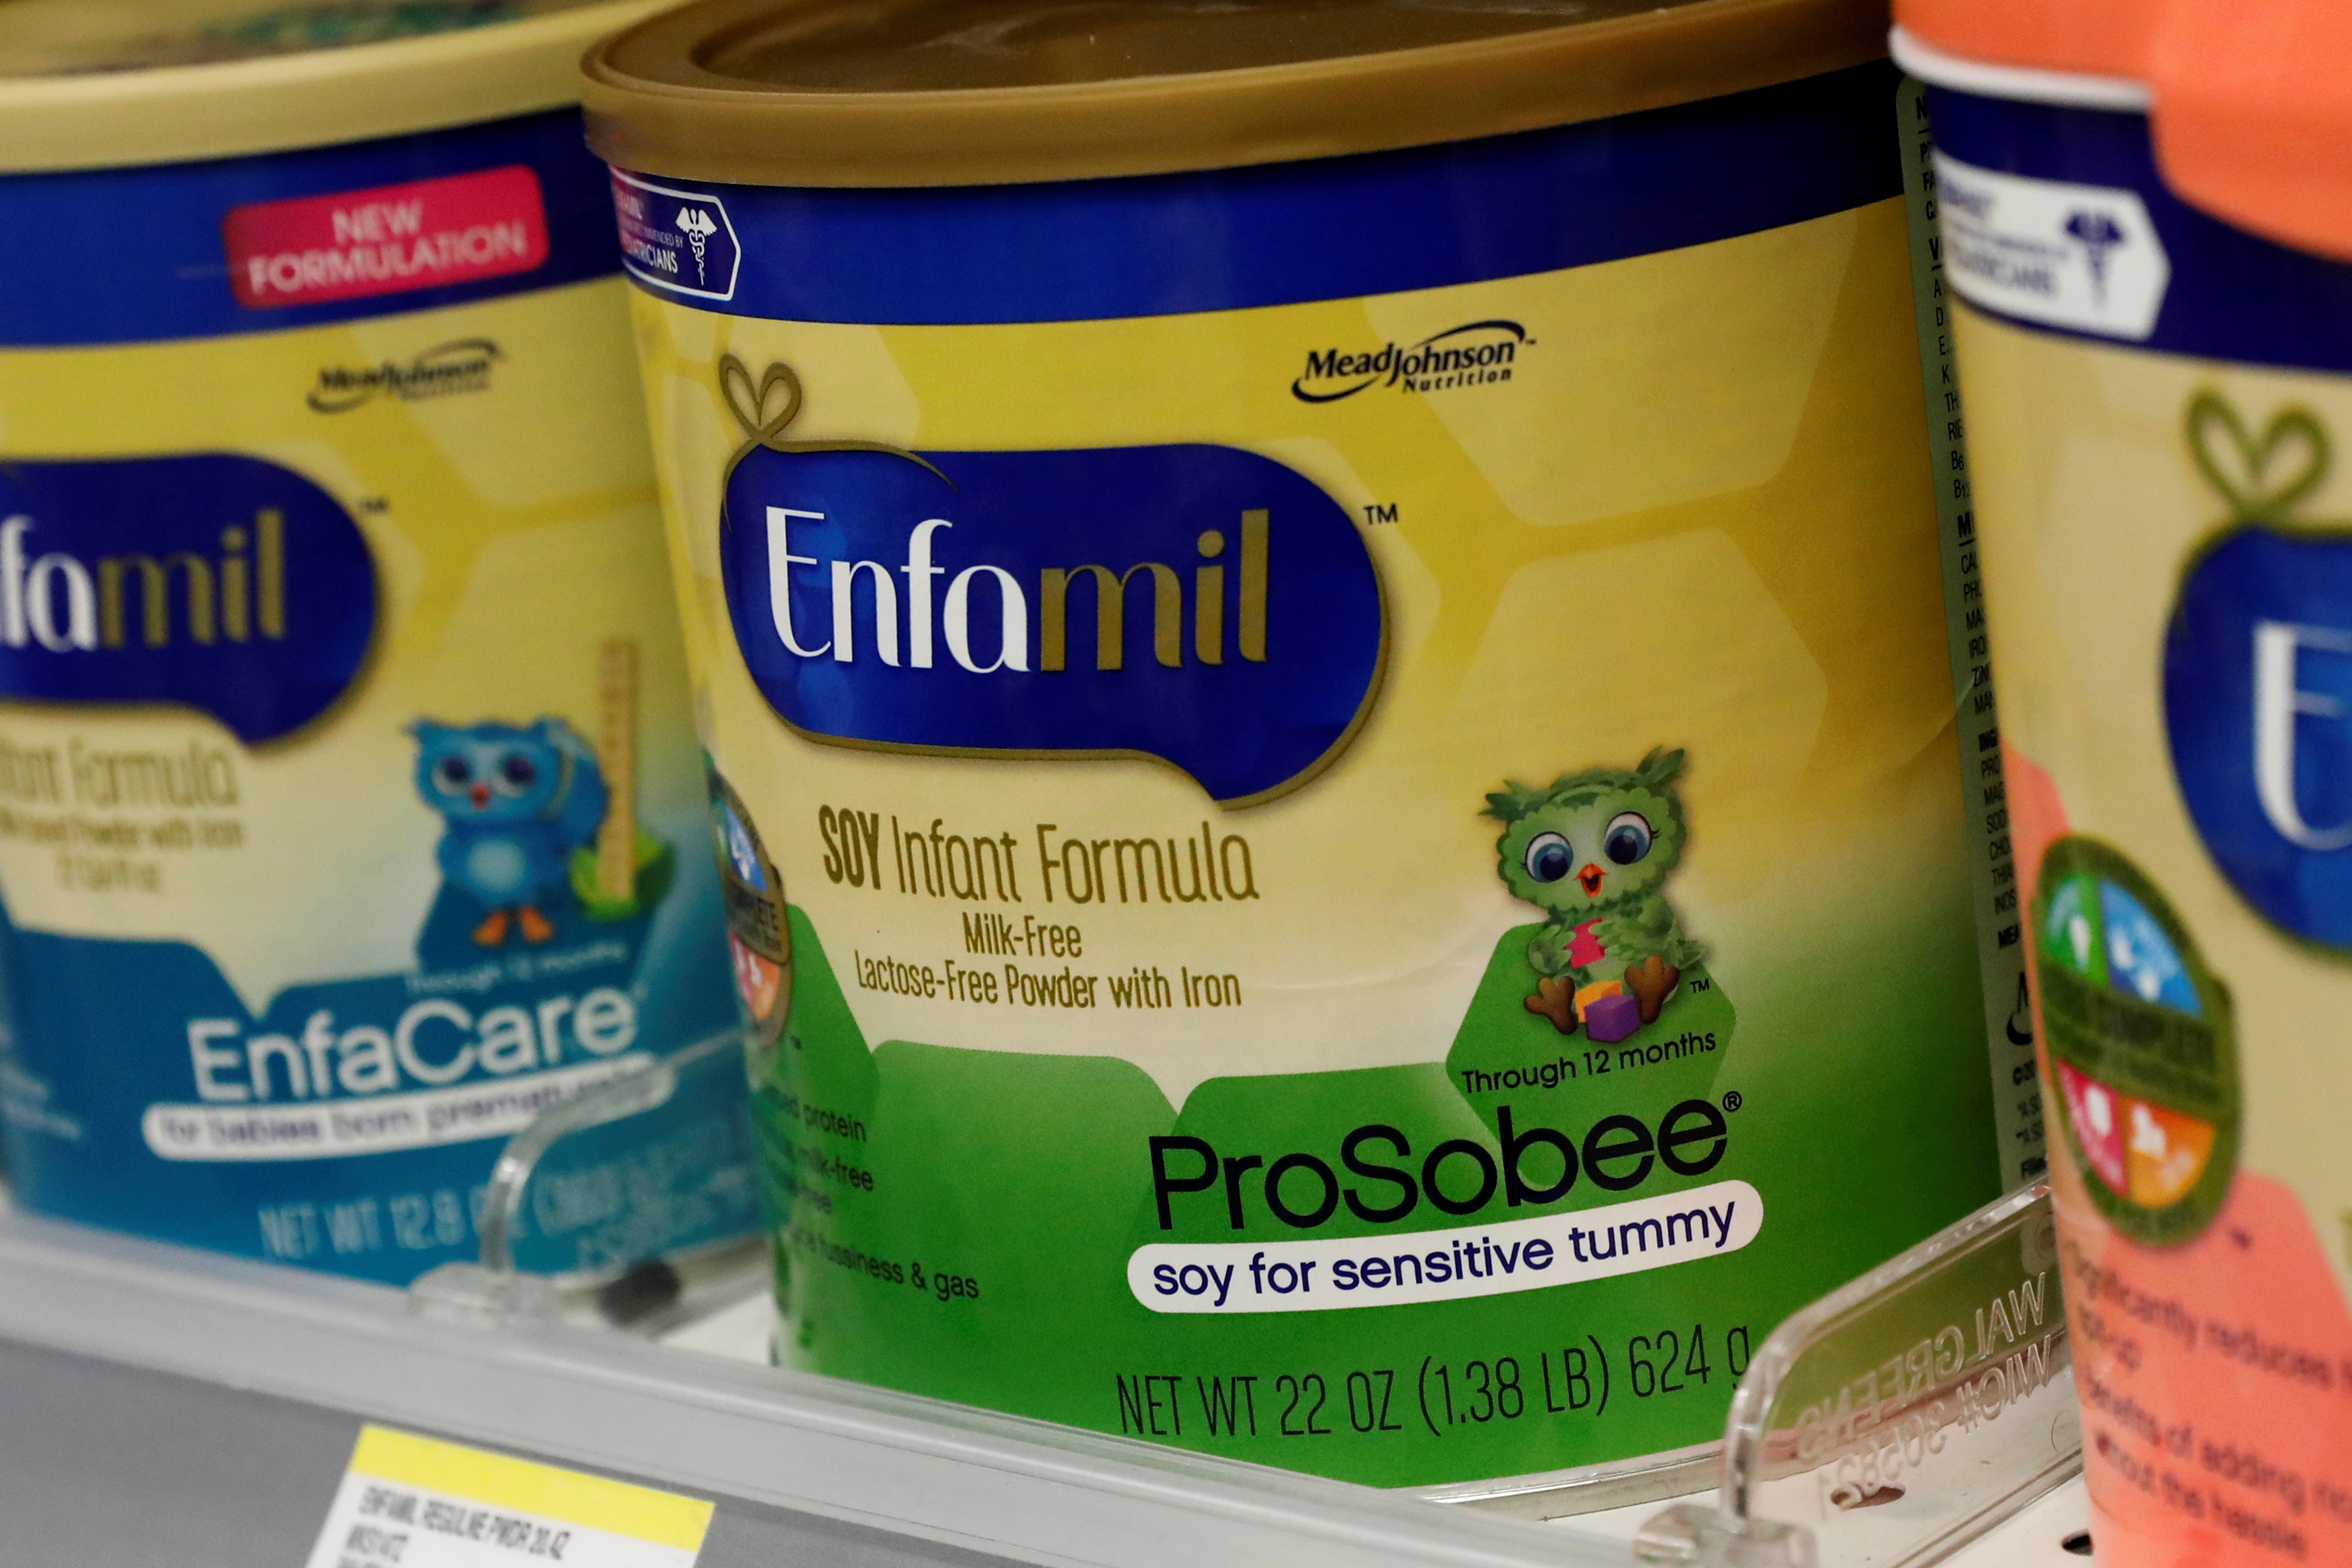 Mead Johnson's product Enfamil baby formula are displayed on a store shelf in New York